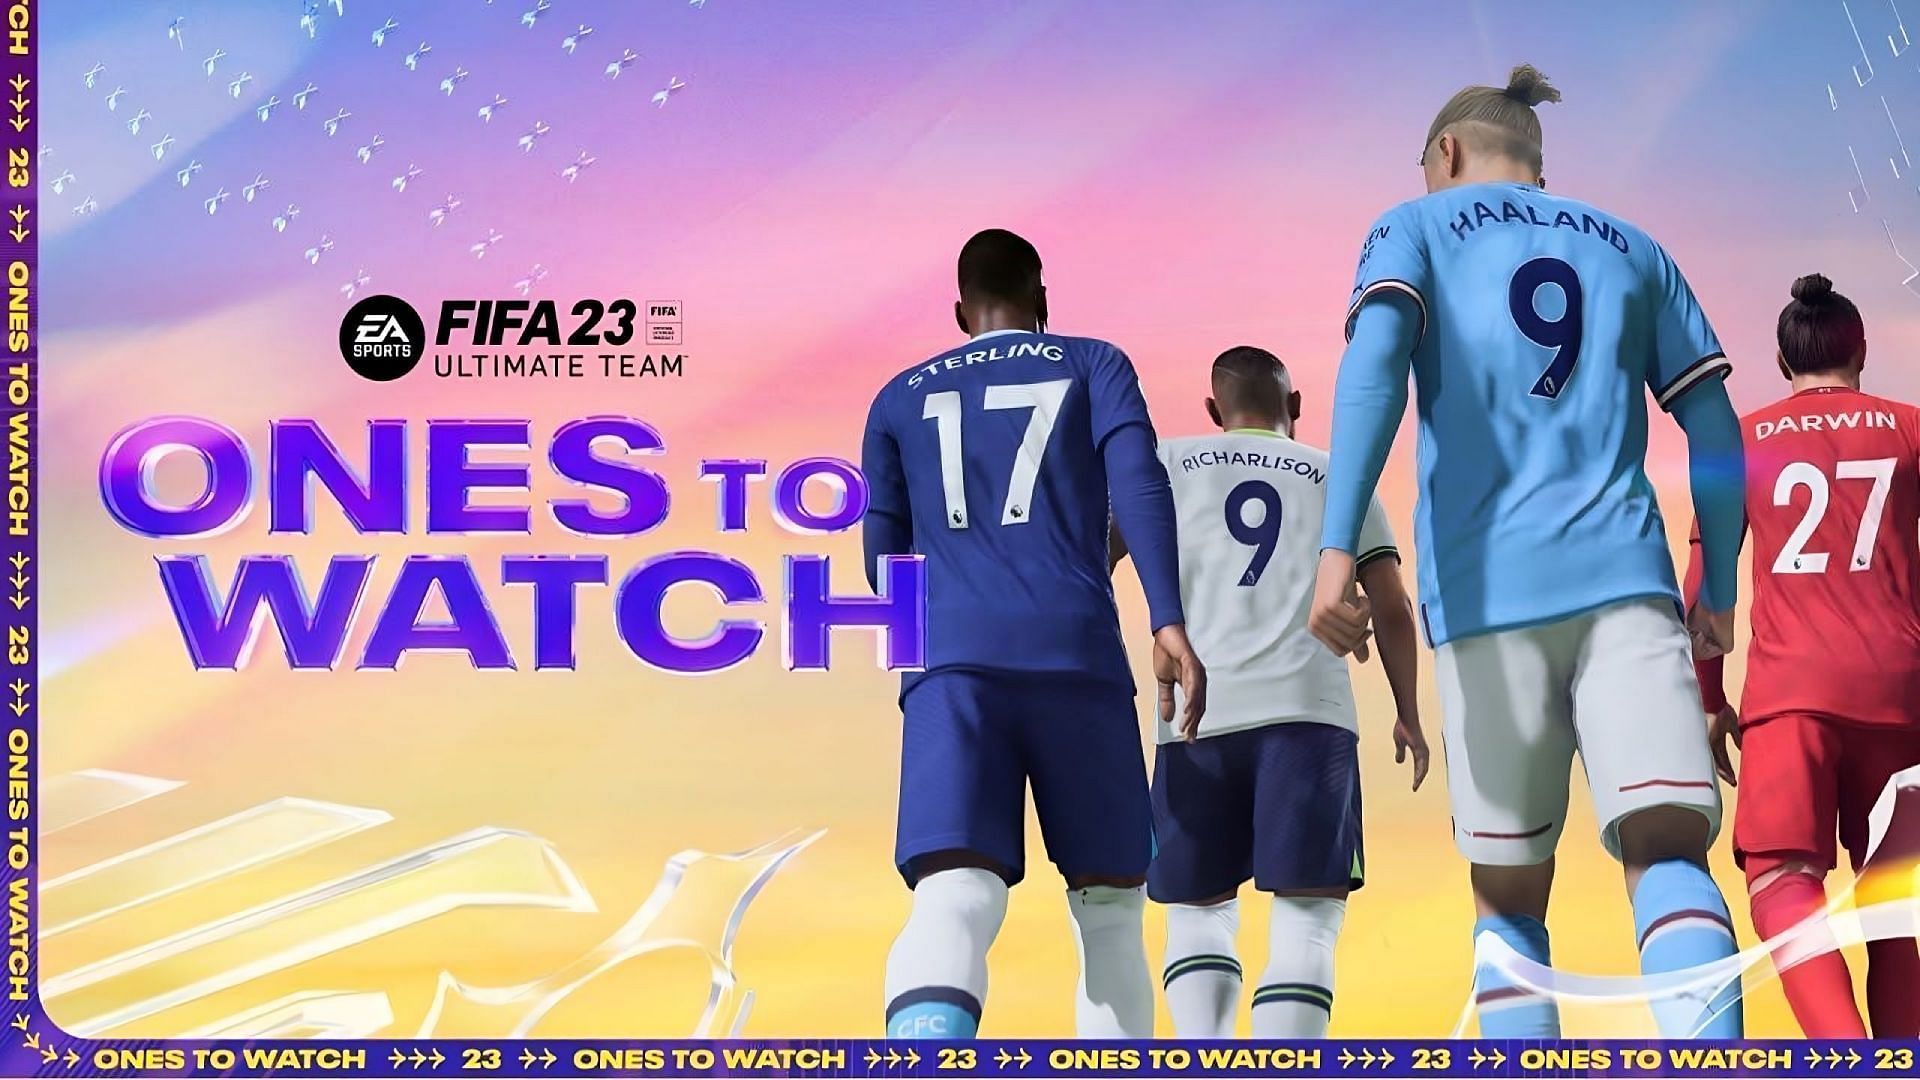 The best Ones to Watch cards in FIFA 23 (Image via EA Sports)